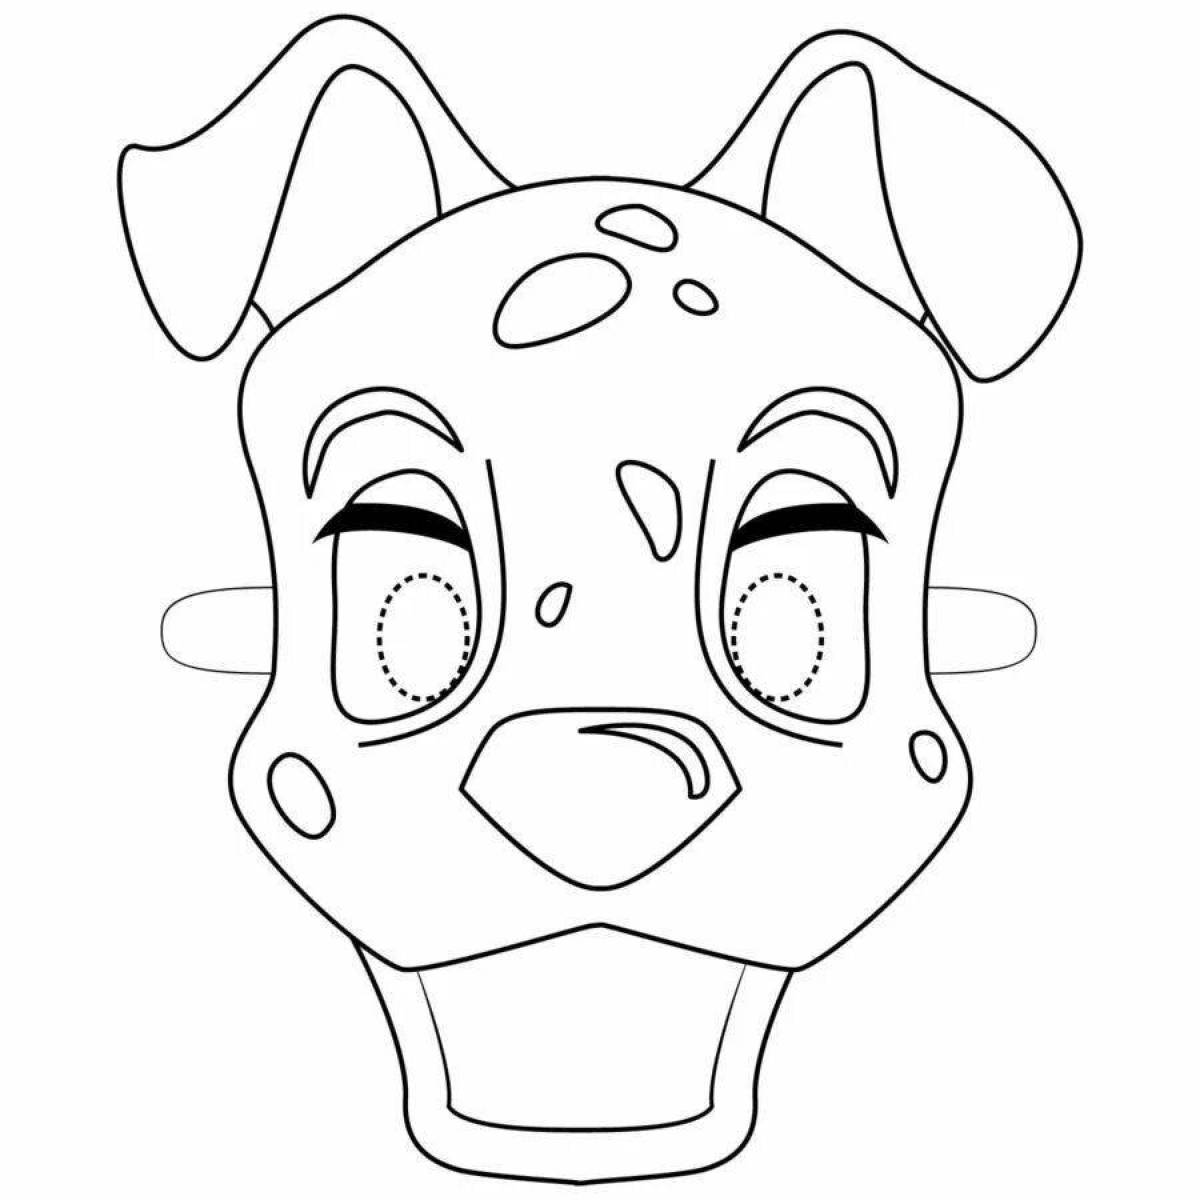 Bright animal mask coloring picture